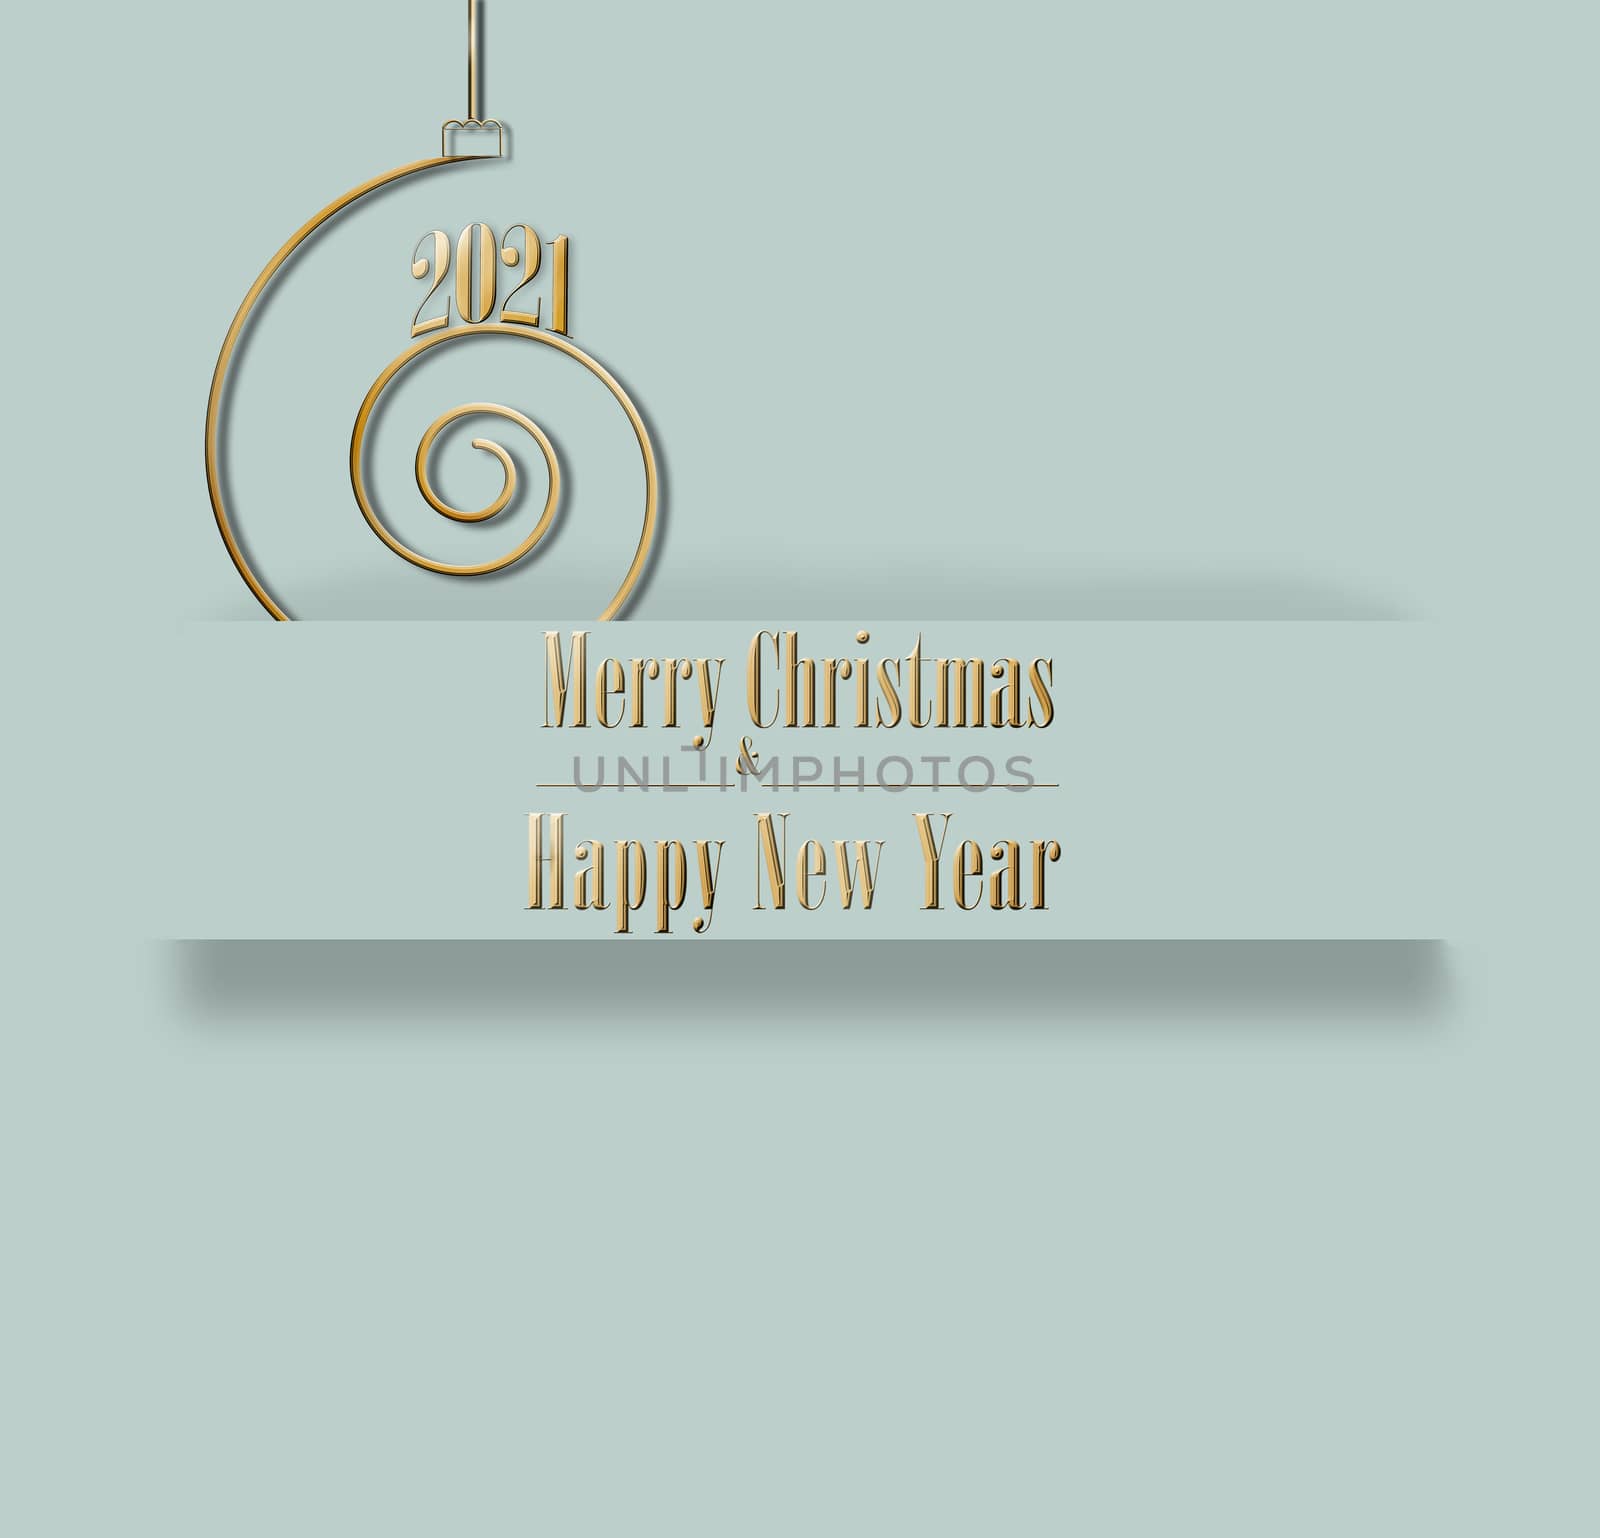 Elegant luxury 2021 Merry Christmas and Happy New Year card by NelliPolk